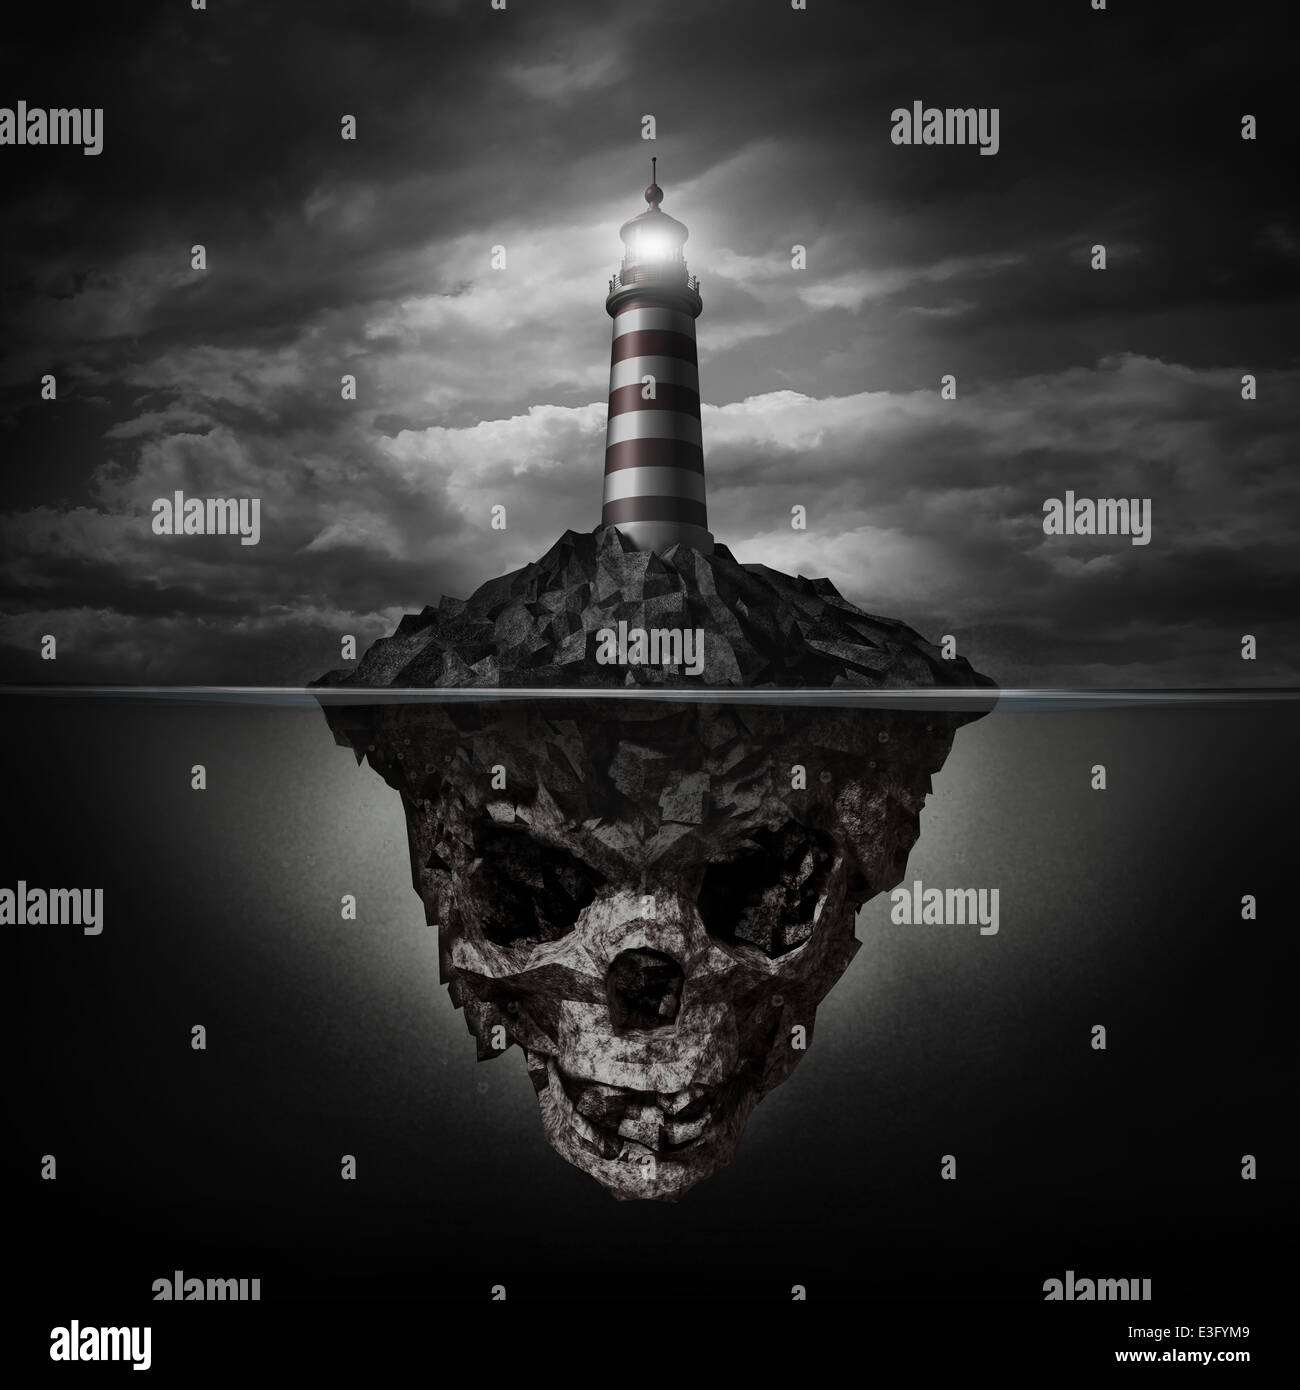 Dangerous advice and bad direction concept as a glowing lighthouse beacon on a rock island shaped as an underwater human skull on a dark background as a metaphor for dishonesty and deception. Stock Photo